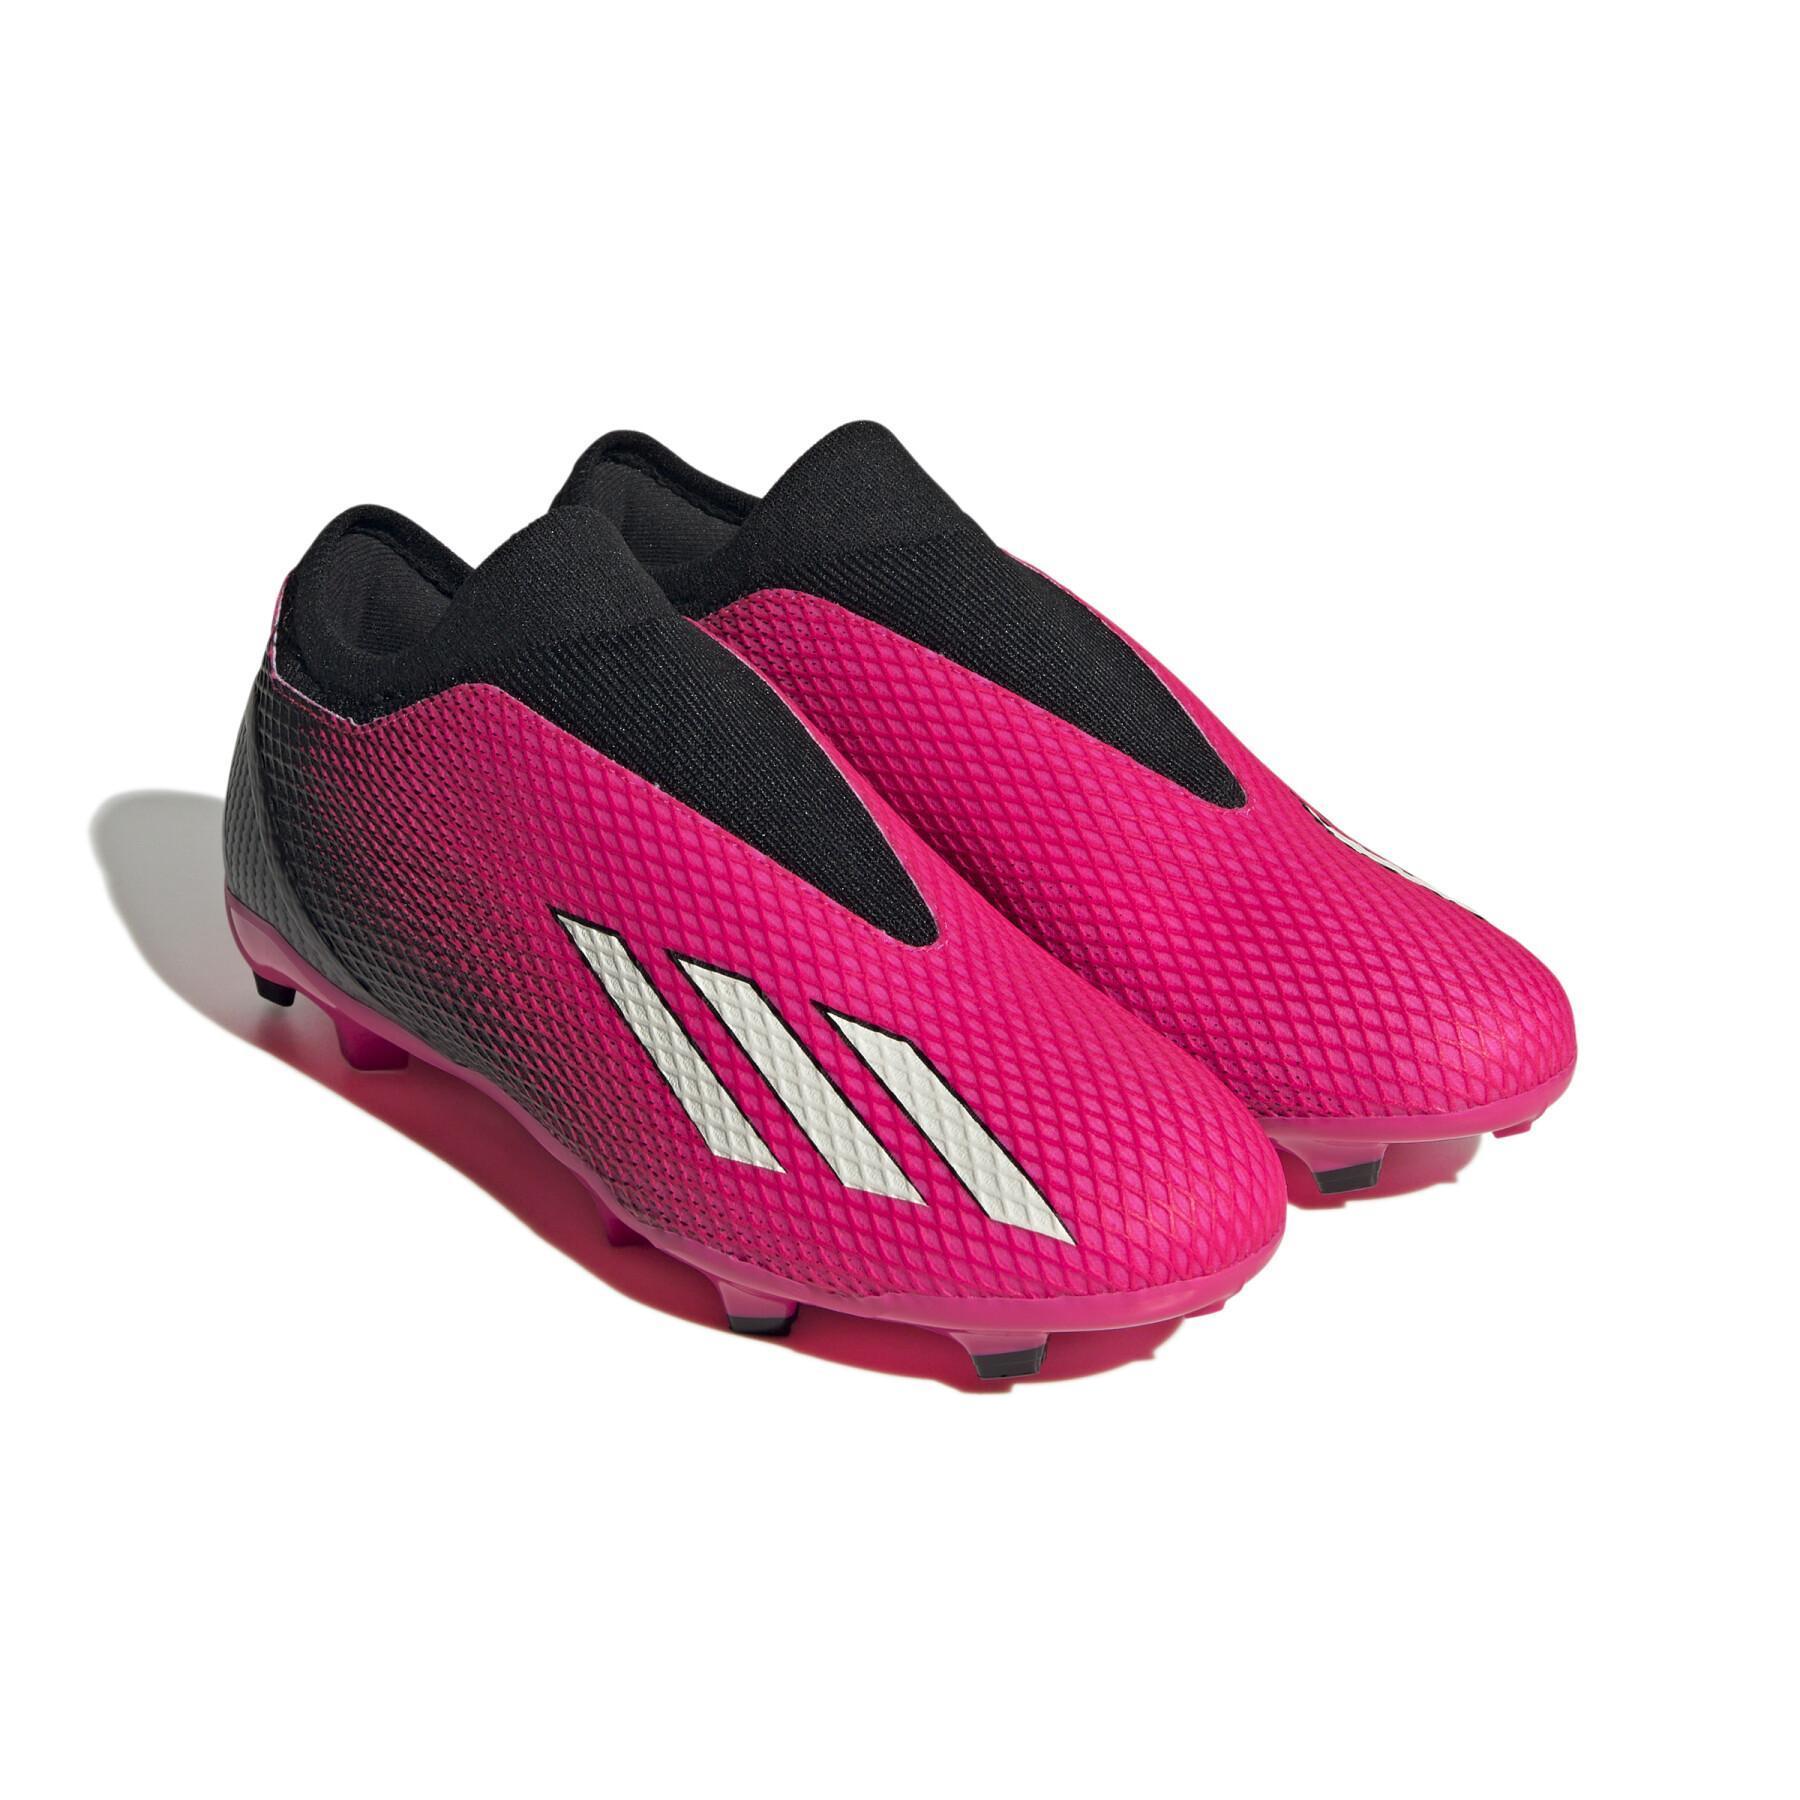 Soccer cleats without laces adidas X Speedportal.3 - Own your Football